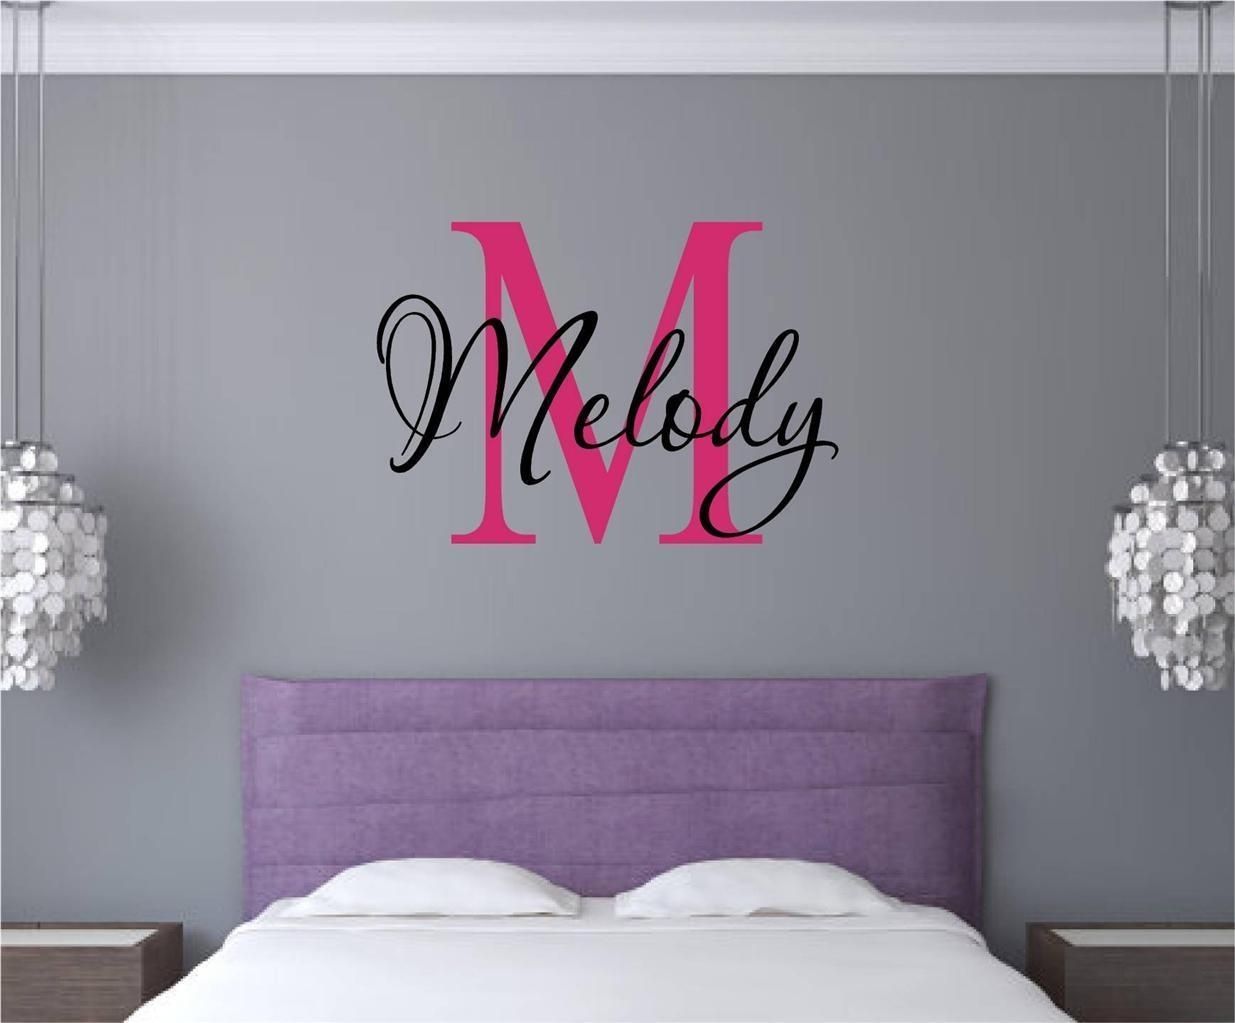 Wall Art Designs: Name Wall Art Custom Monogram Name Vinyl Decal Within Most Up To Date Johannesburg Canvas Wall Art (View 8 of 15)